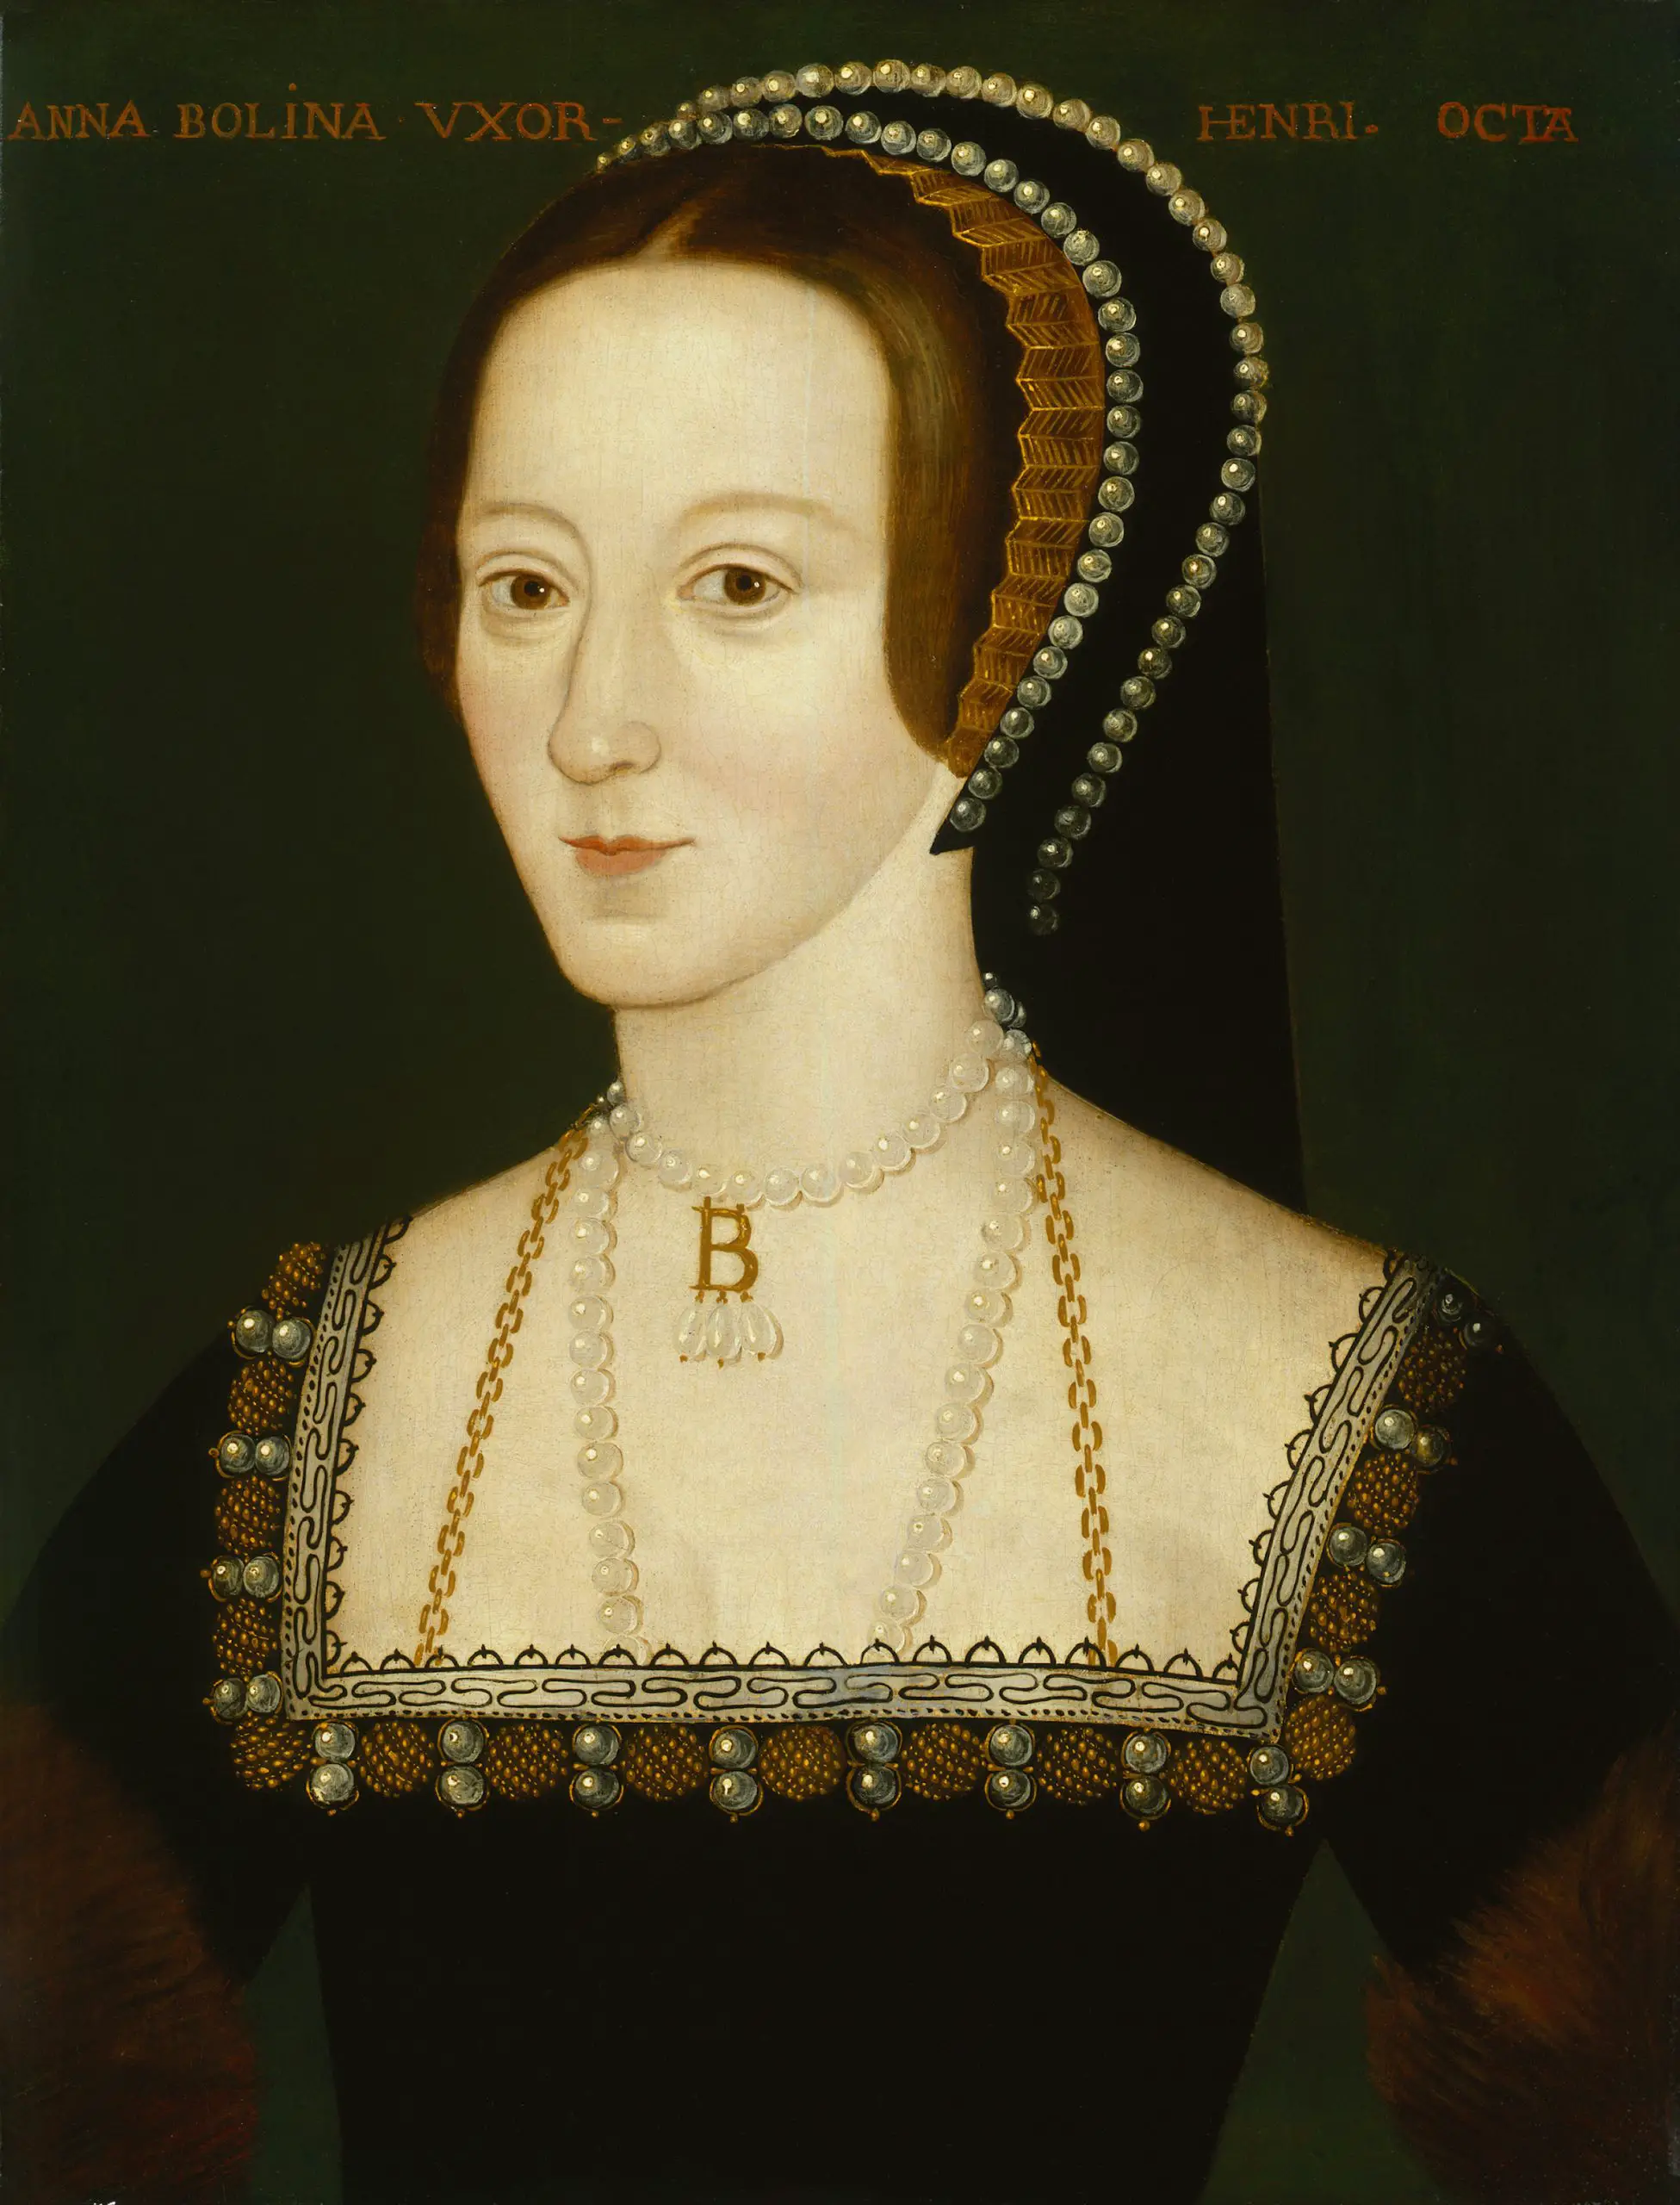 Henry VIII’s wives